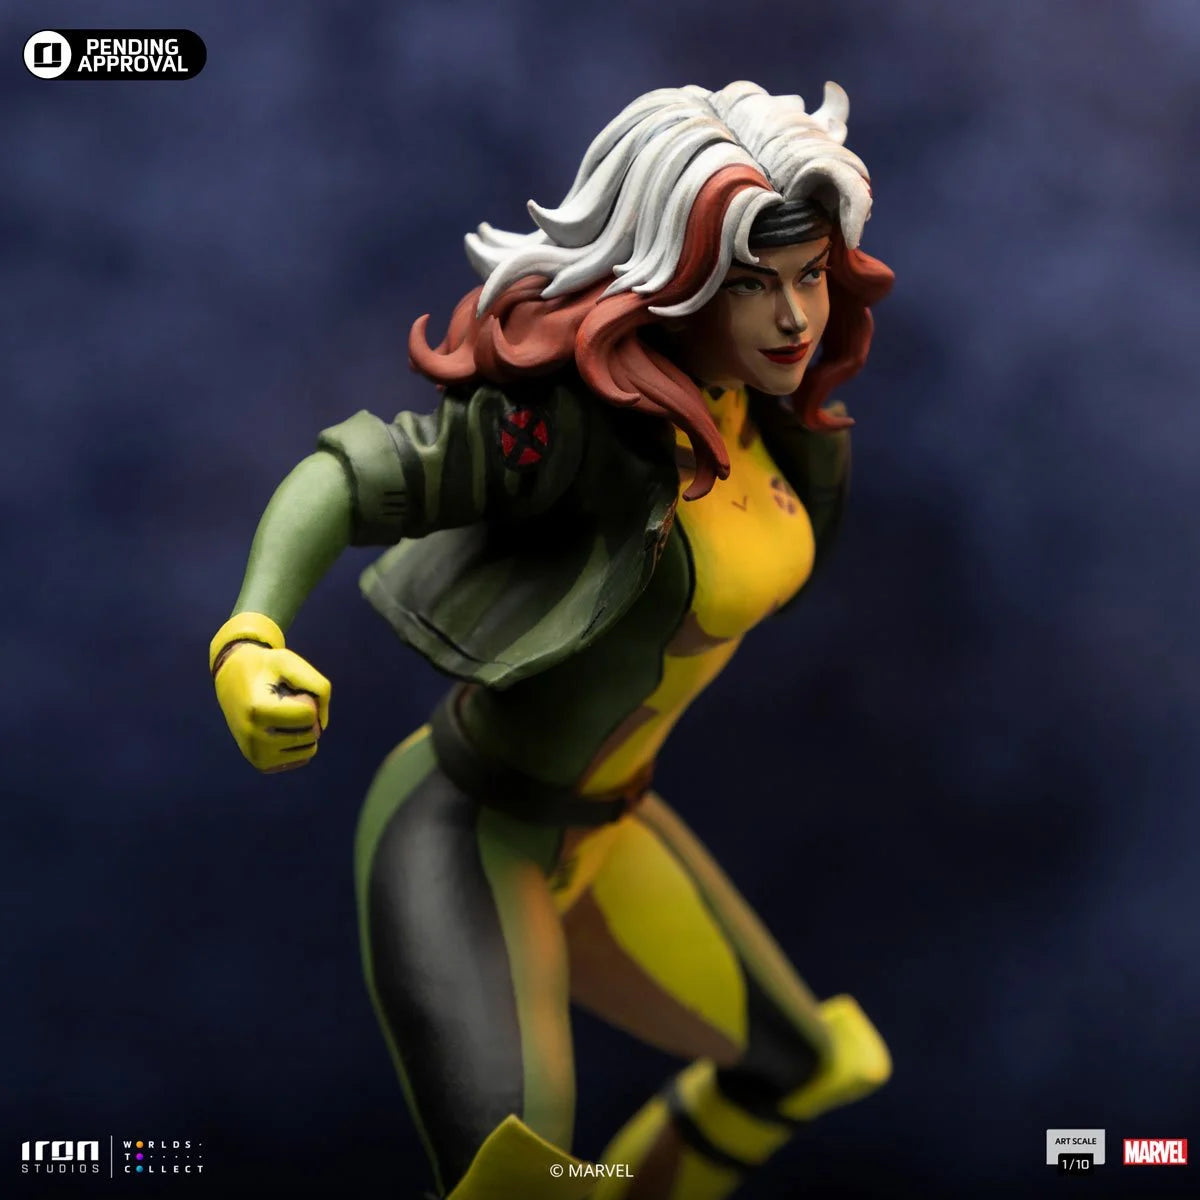 ROGUE X-MEN '97 1:10 Scale Statue by Iron Studios